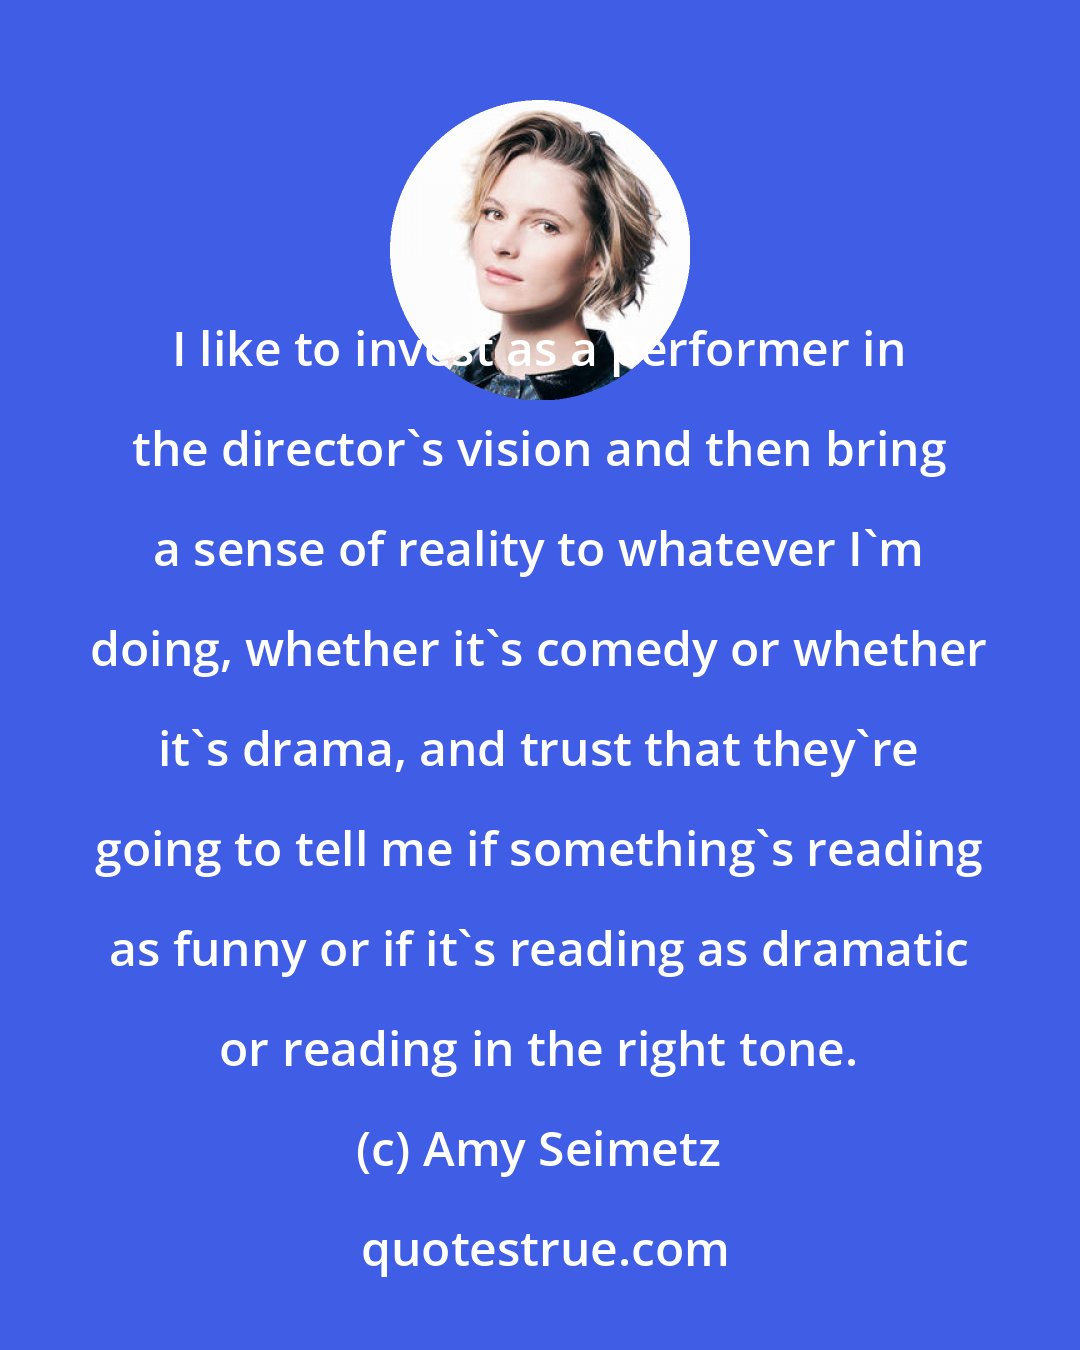 Amy Seimetz: I like to invest as a performer in the director's vision and then bring a sense of reality to whatever I'm doing, whether it's comedy or whether it's drama, and trust that they're going to tell me if something's reading as funny or if it's reading as dramatic or reading in the right tone.